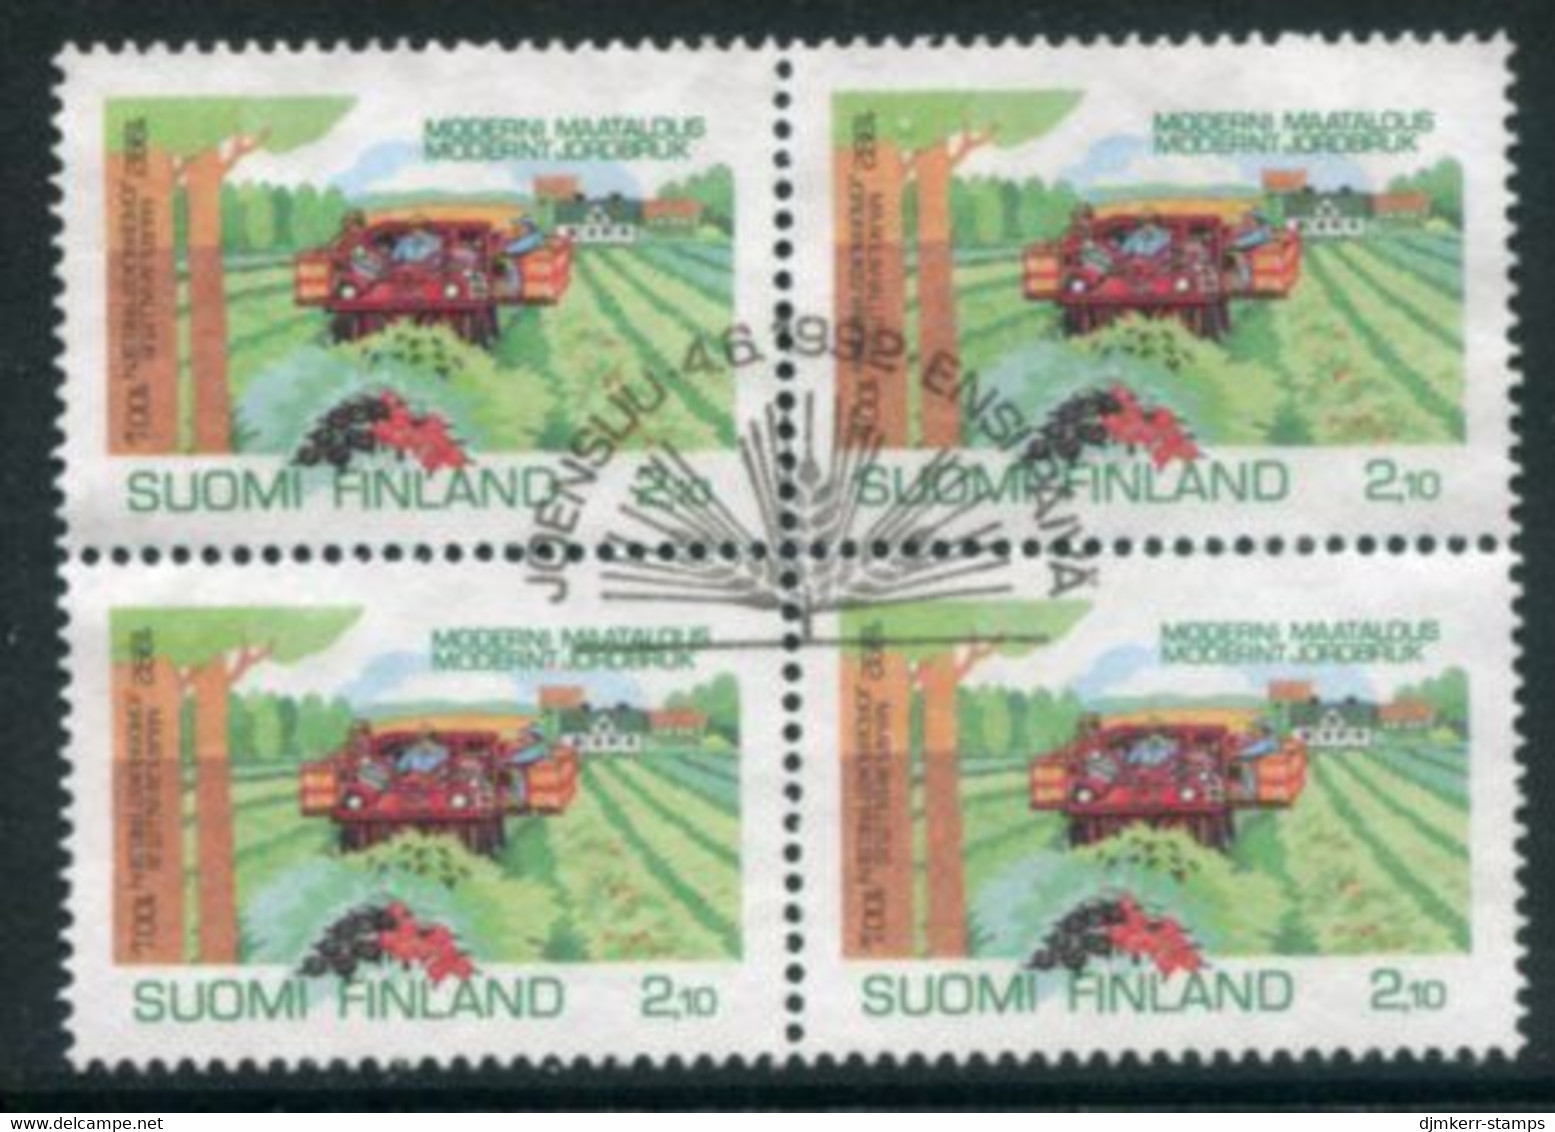 FINLAND 1992 Centenary Of Agriculture Ministry Block Of 4 Used.  Michel 1180 - Gebruikt